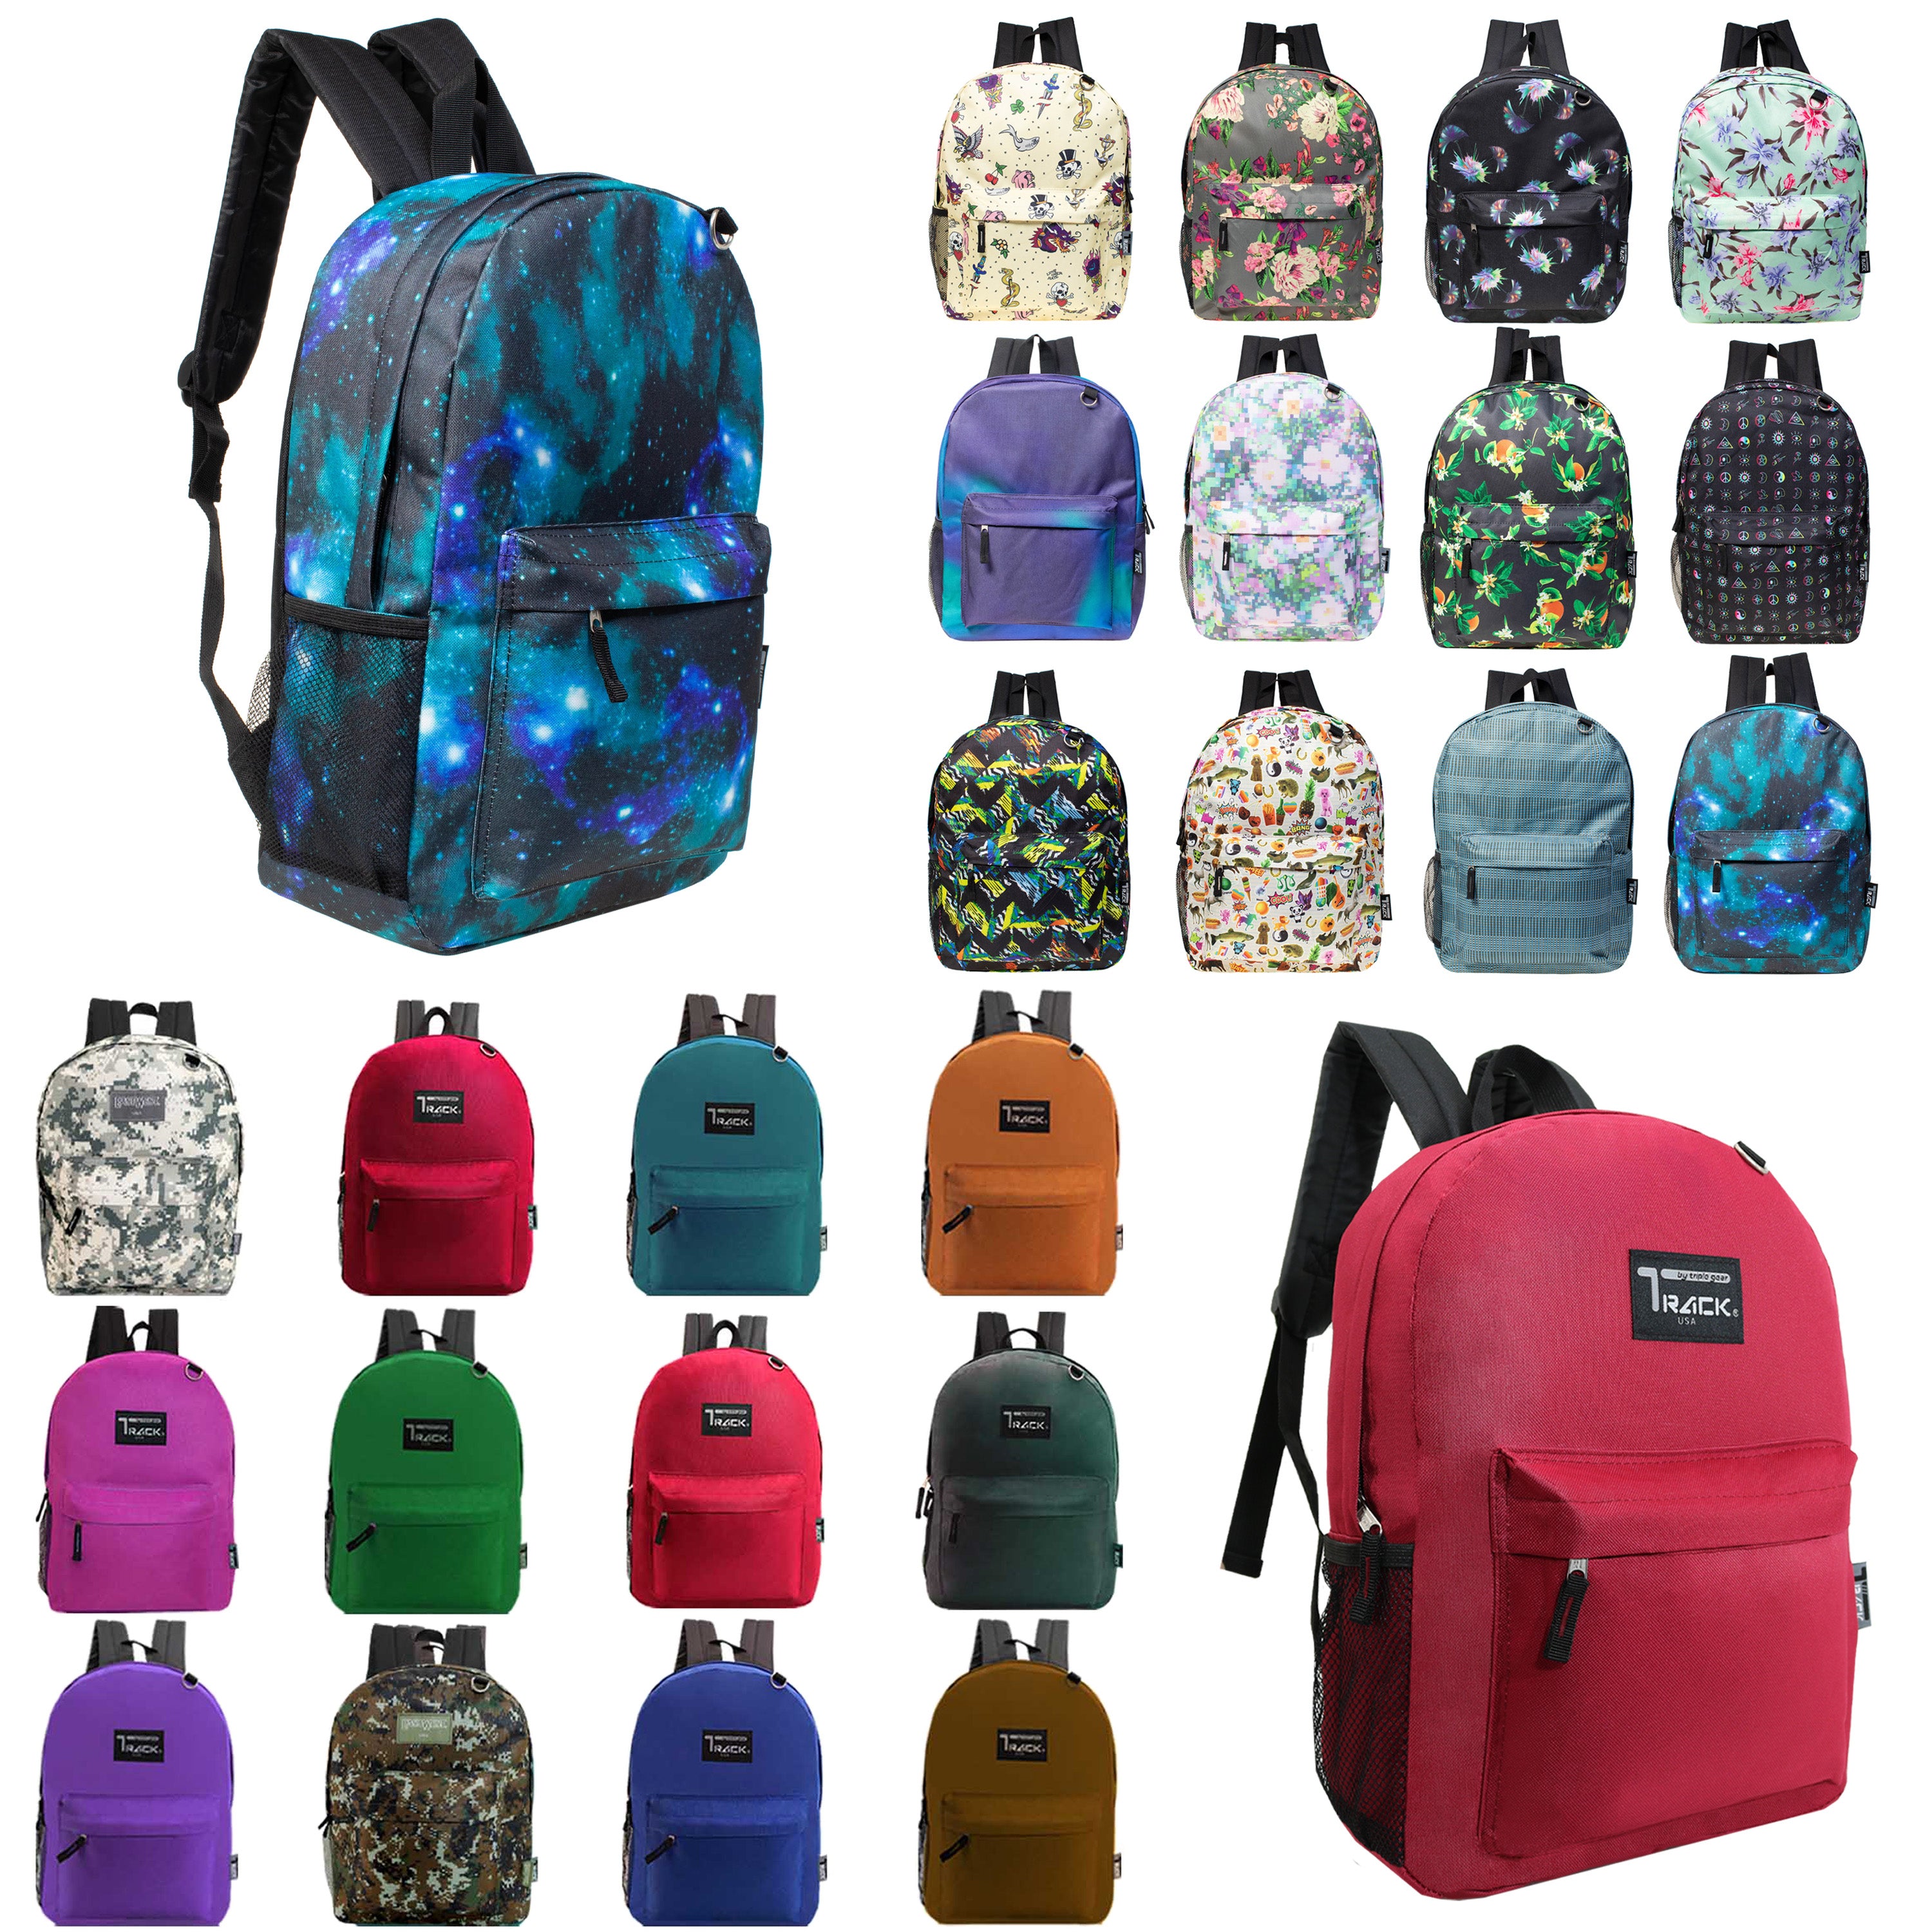 12 Track Brand 17" Wholesale Backpacks in Assorted Colors & Prints and 12 Bulk School Supply Kits of Your Choice